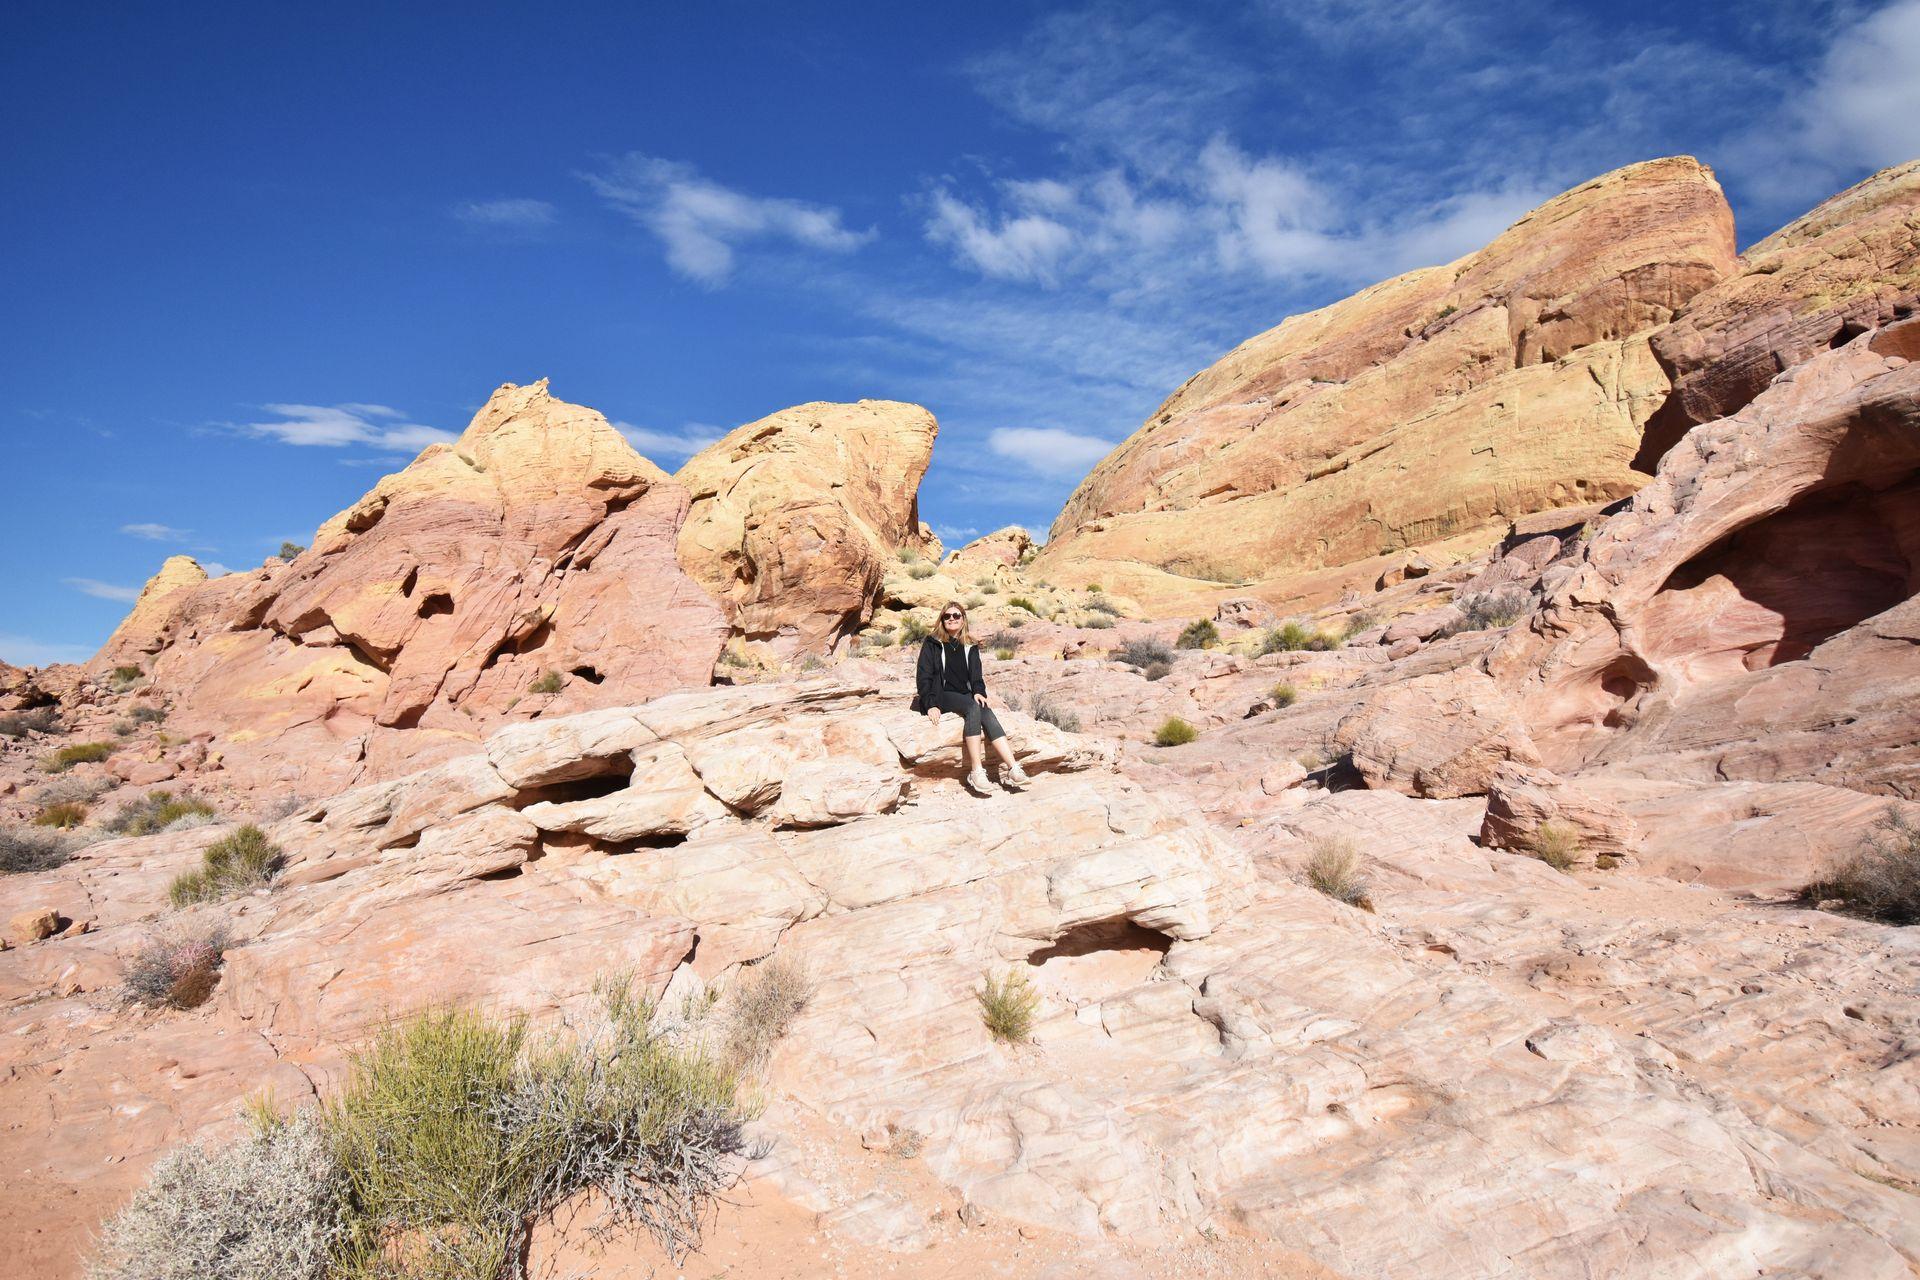 Lydia sitting on a vista of pink and orange rocks in Valley of Fire State Park.